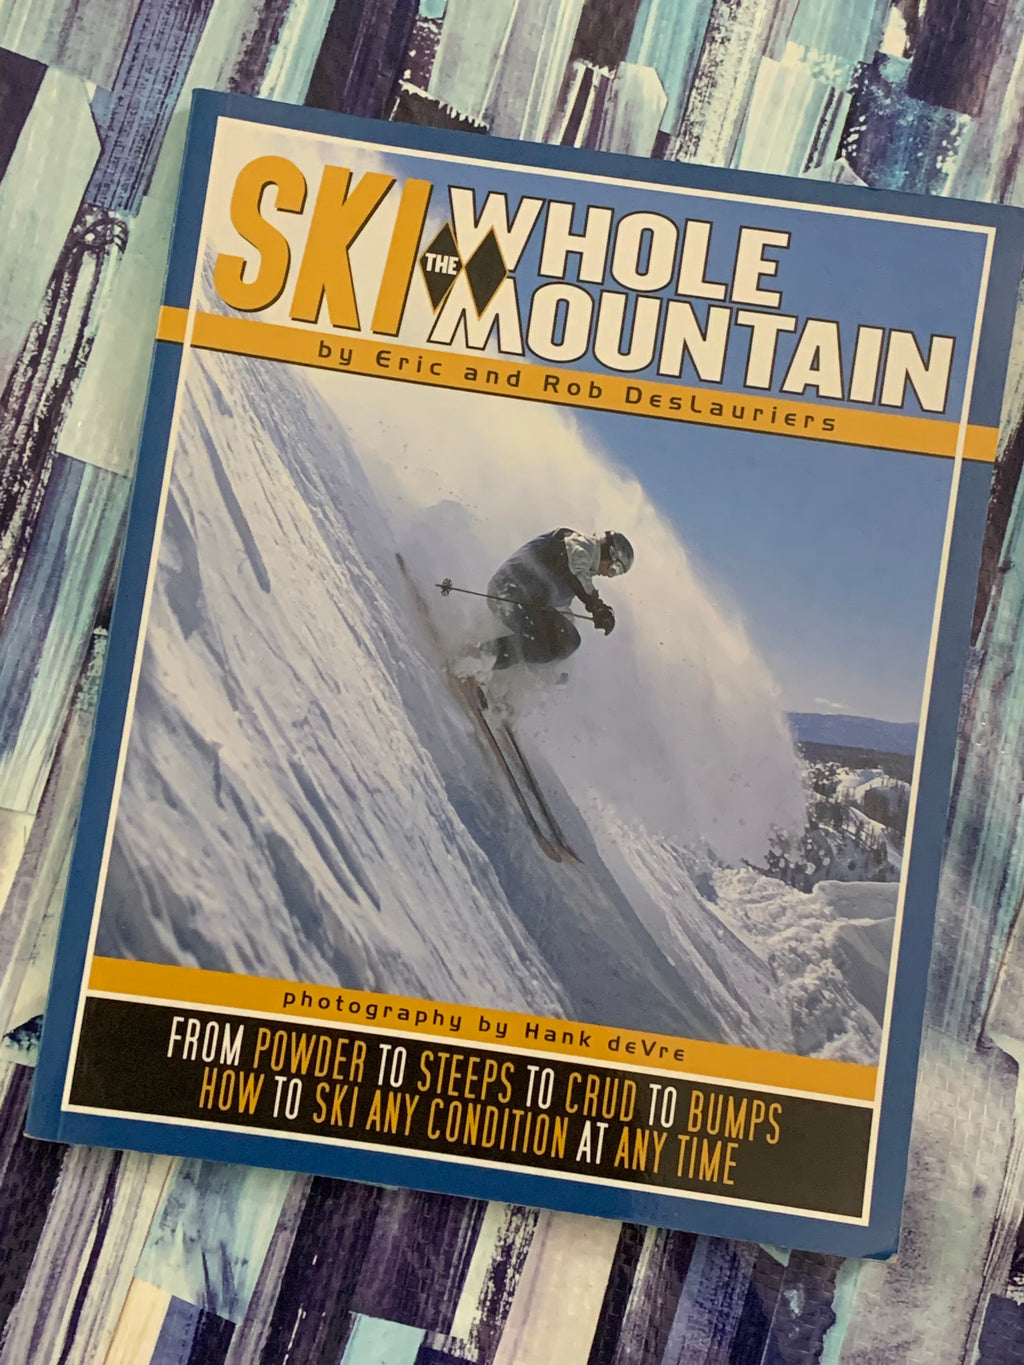 Ski the Whole Mountain- By Eric and Rob DesLauriers